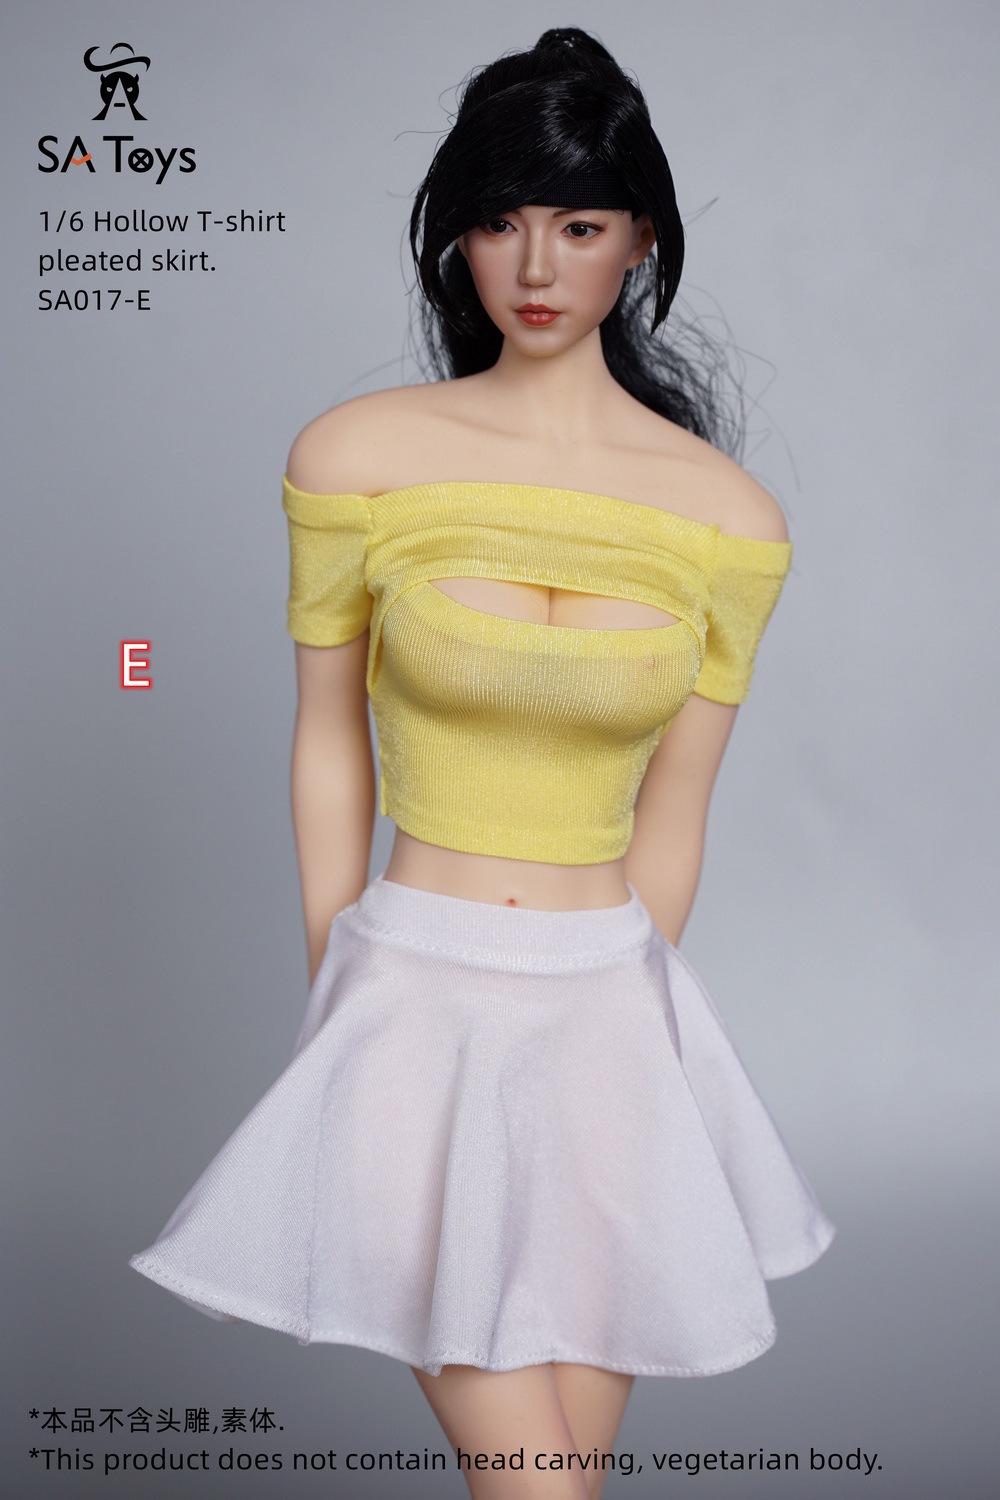 SAToys - NEW PRODUCT: SA Toys: 1/6 Personalized Poster Style Tight Dress/ Hollow T-shirt Pleated Skirt/Side Zipper Tight Skirt [Various styles available]  16560510